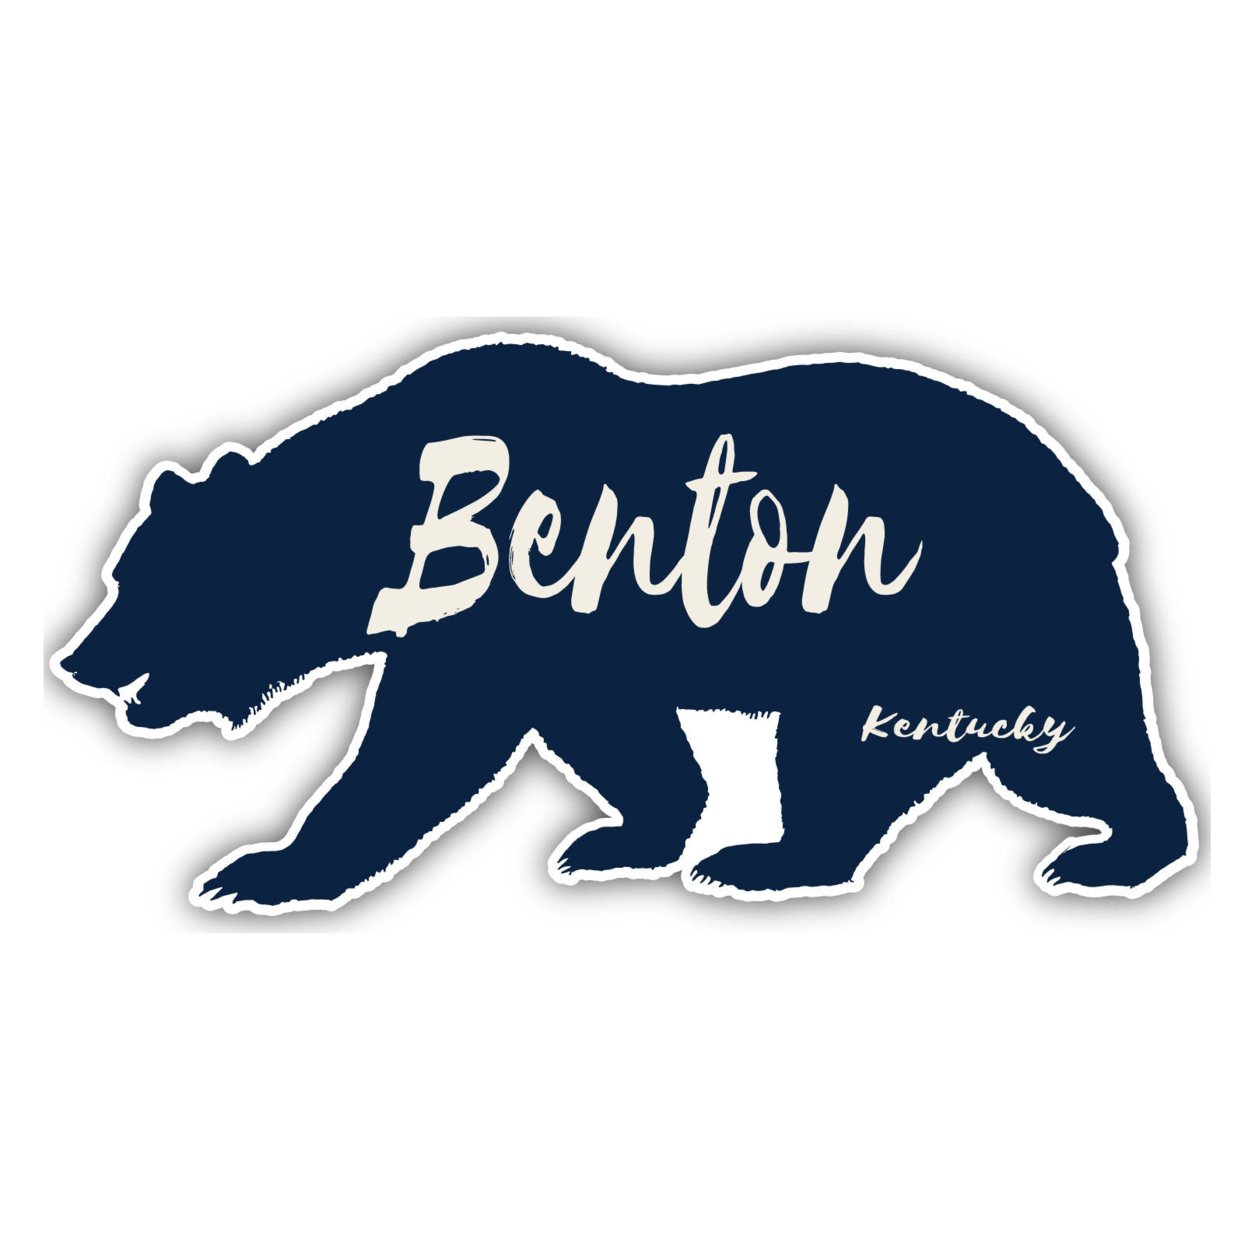 Benton Kentucky Souvenir Decorative Stickers (Choose Theme And Size) - 4-Pack, 8-Inch, Great Outdoors